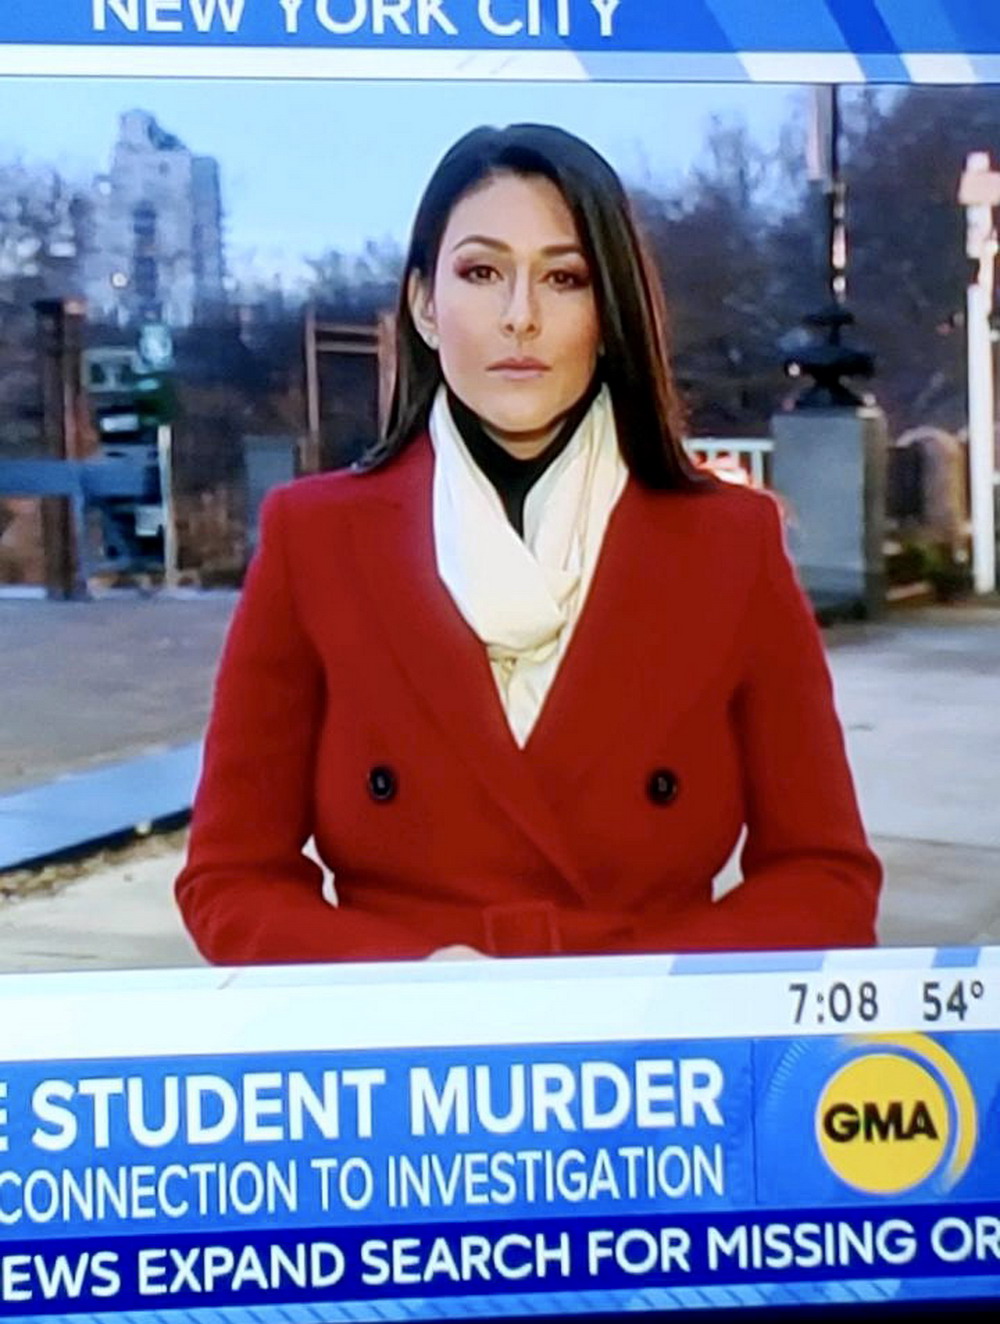 photo caption - New York City 540 Student Murder Gma Connection To Investigation Ews Expand Search For Missing Or